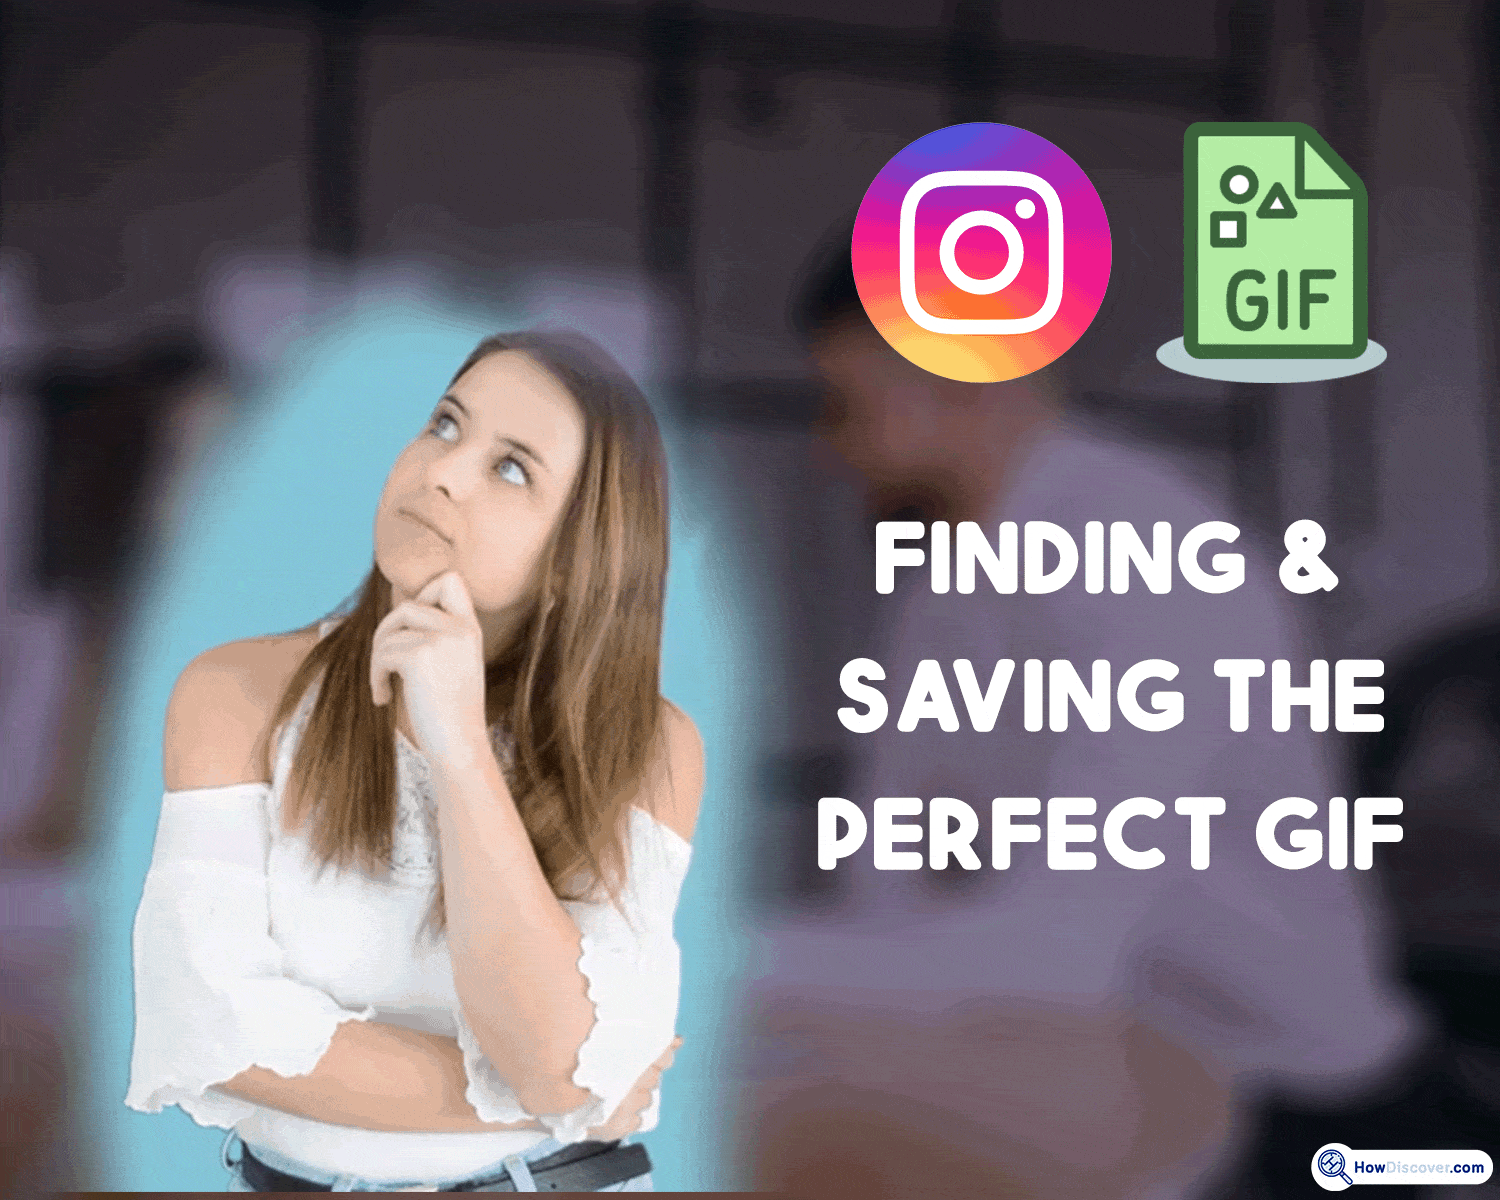 Finding & saving the perfect GIF - How to Upload GIFs to Instagram